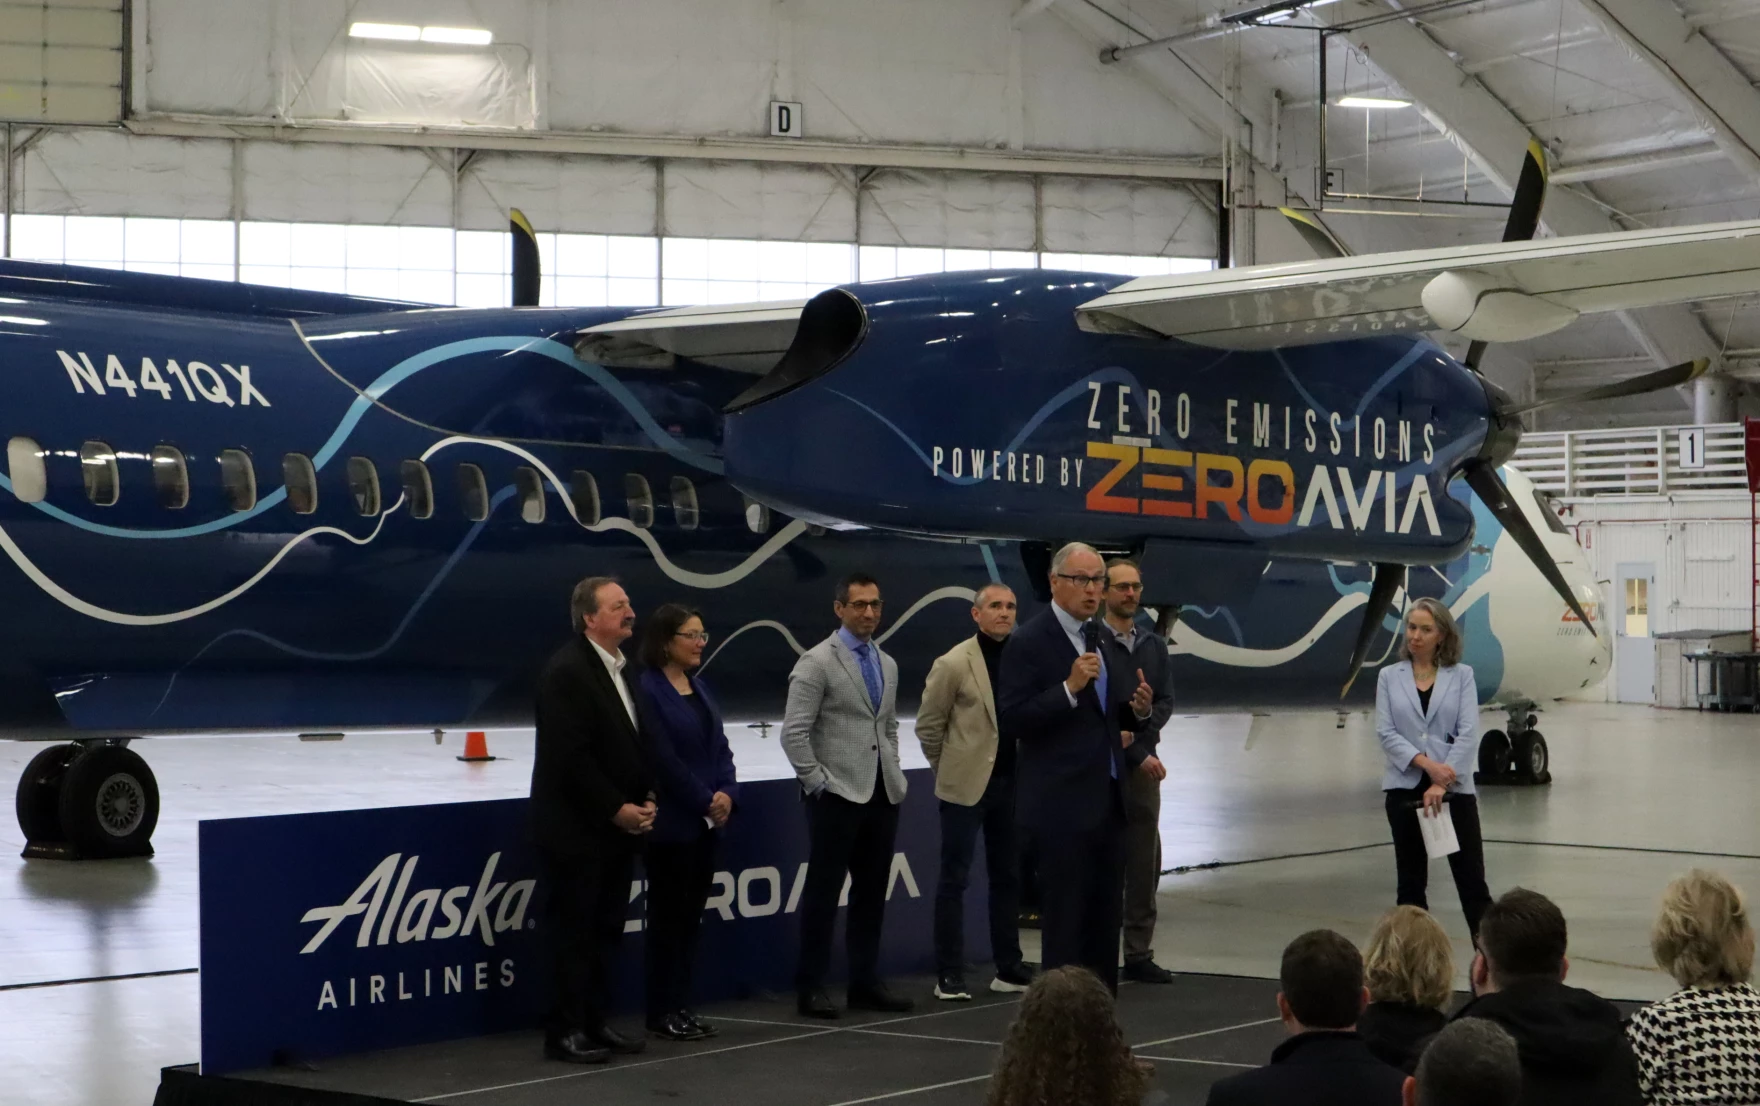 Tom Banse / NW News Network Elected officials and corporate leaders gathered in a Paine Field hangar to celebrate the handover of a retired Alaska Airlines Q400 turboprop, which will be converted to hydrogen-electric propulsion over the next year